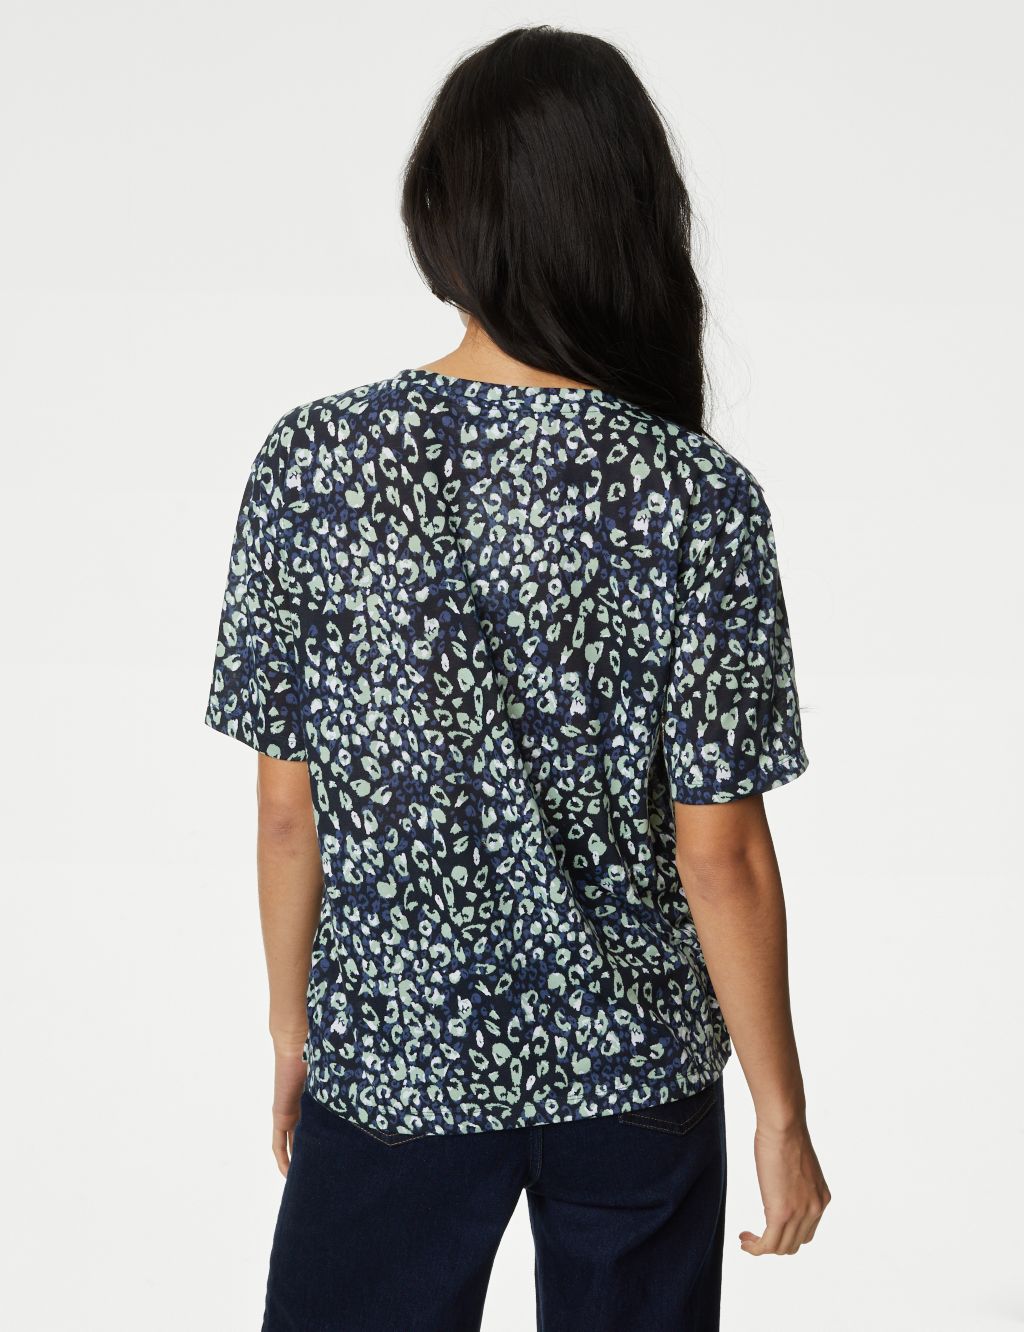 Printed Relaxed T-Shirt image 5